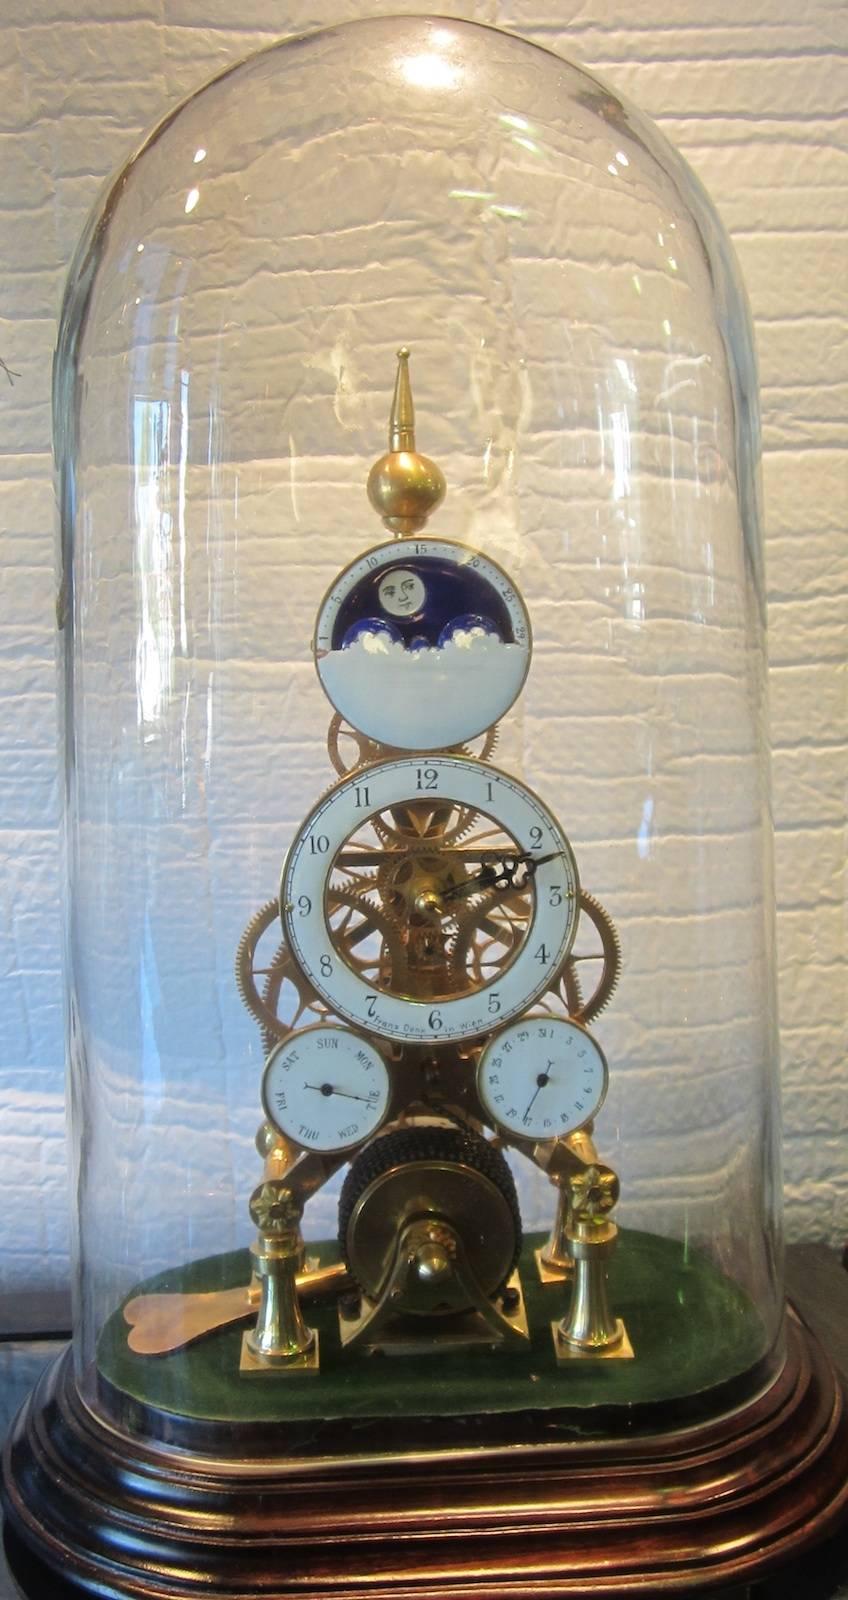 Skeleton clock in a glass dome, fusee movement,
with moon dial (rotates on a 24-hour cycle), day dial, date dial,
signed Franz Denk in Wien,
Measure: 32 x 22 x 52cm high.